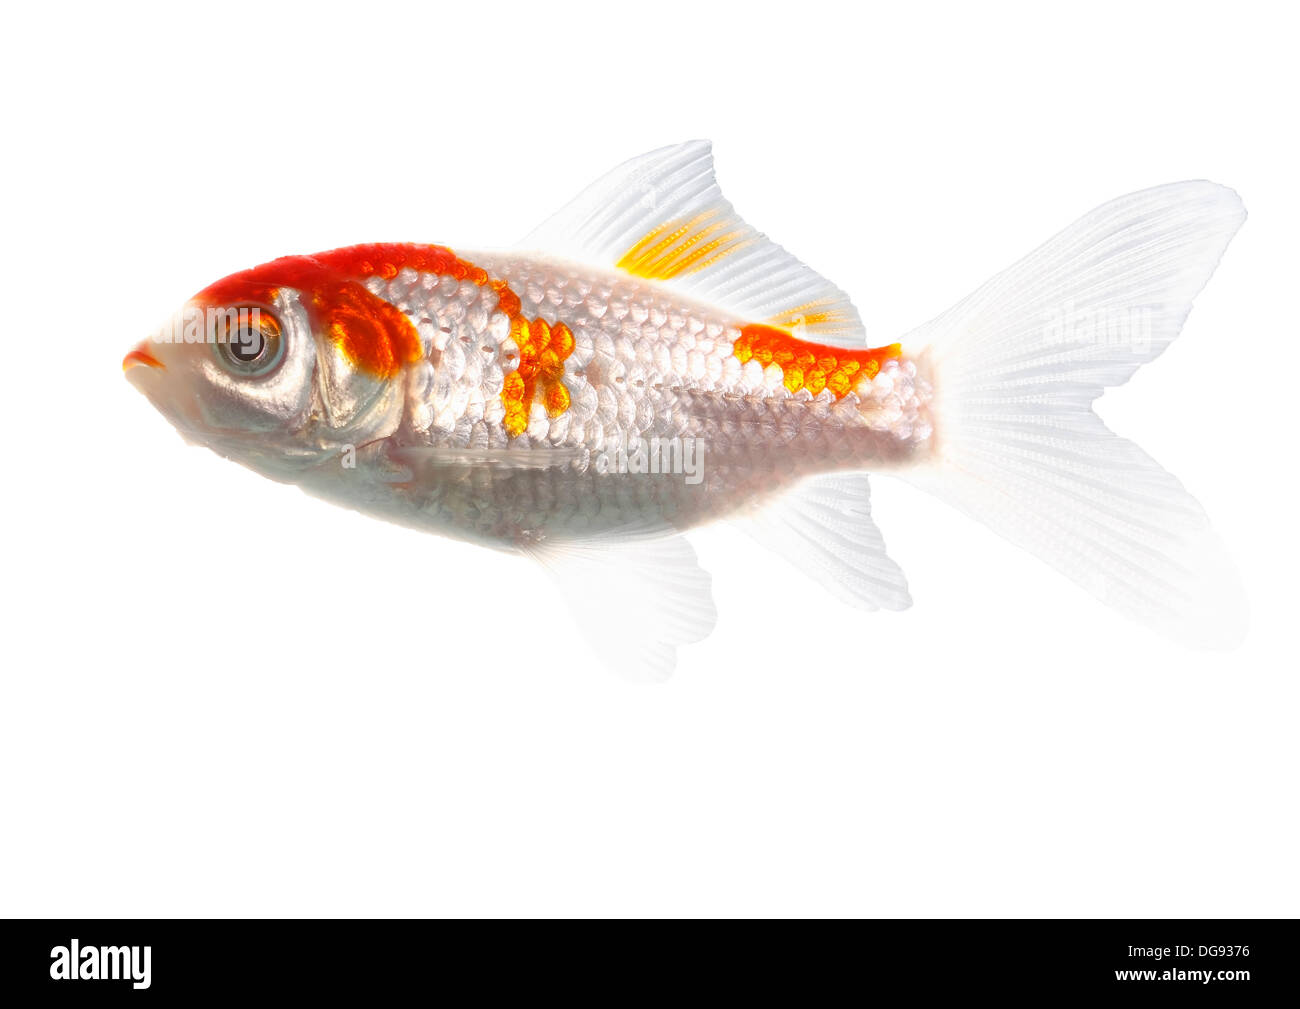 bicolor fish of the carp family on white background Stock Photo